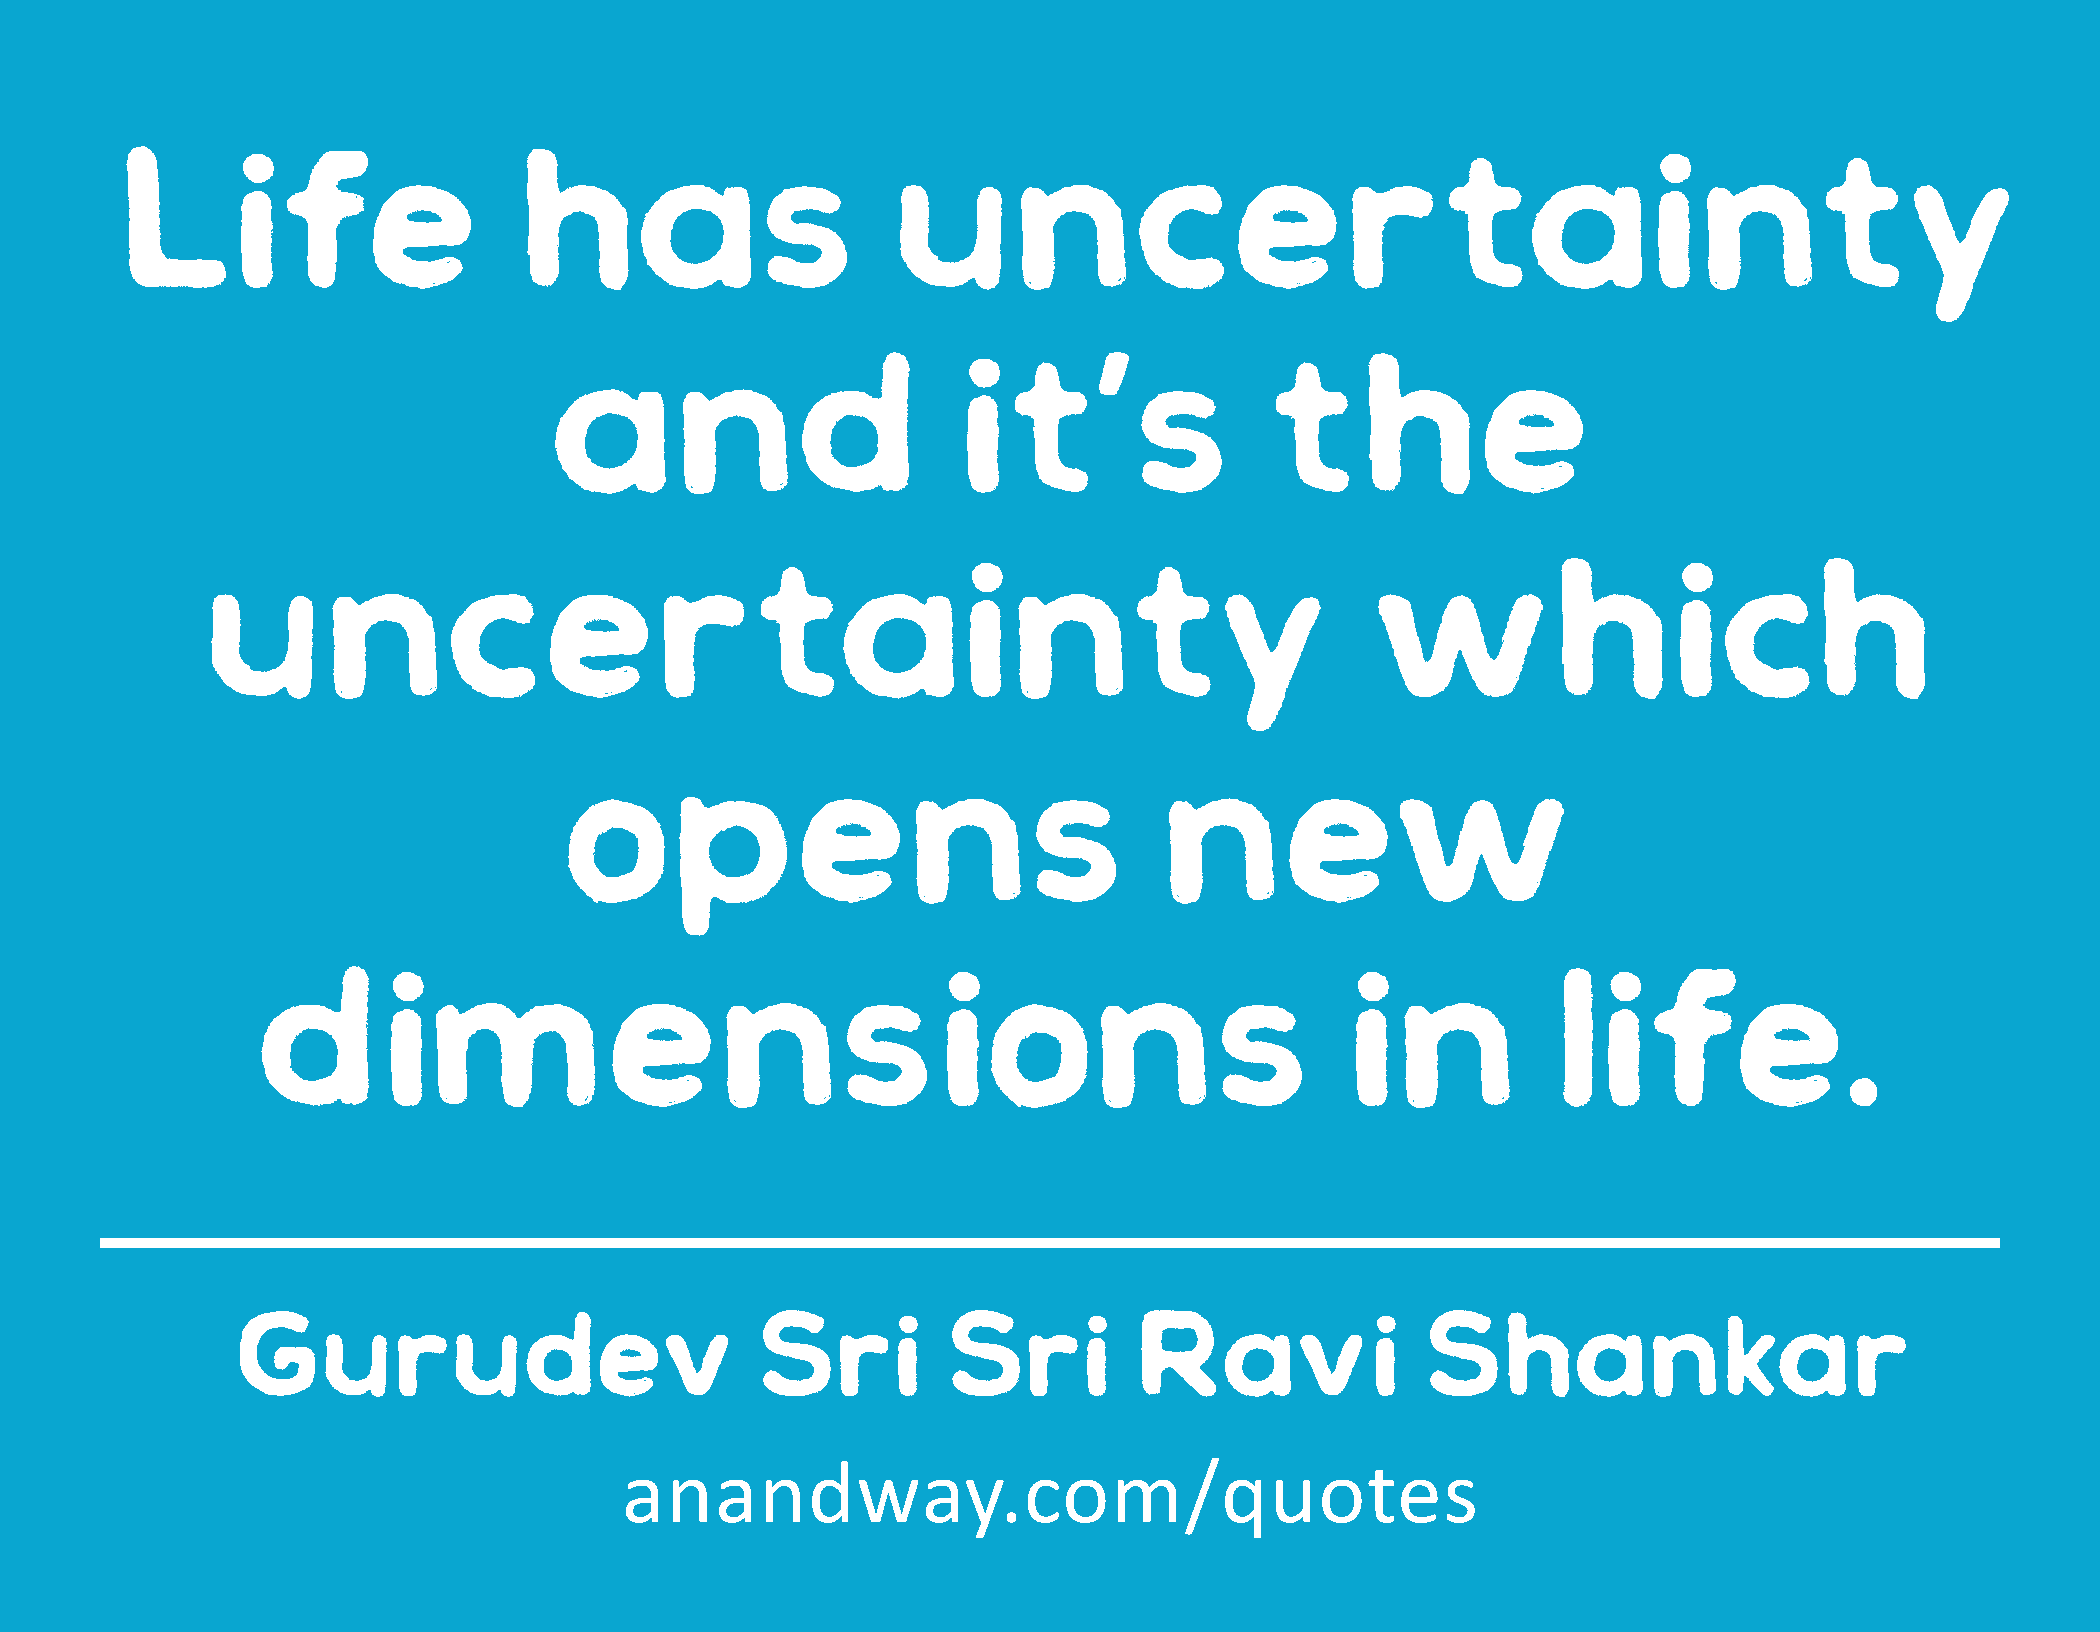 Life has uncertainty and it’s the uncertainty which opens new dimensions in life. 
 -Gurudev Sri Sri Ravi Shankar